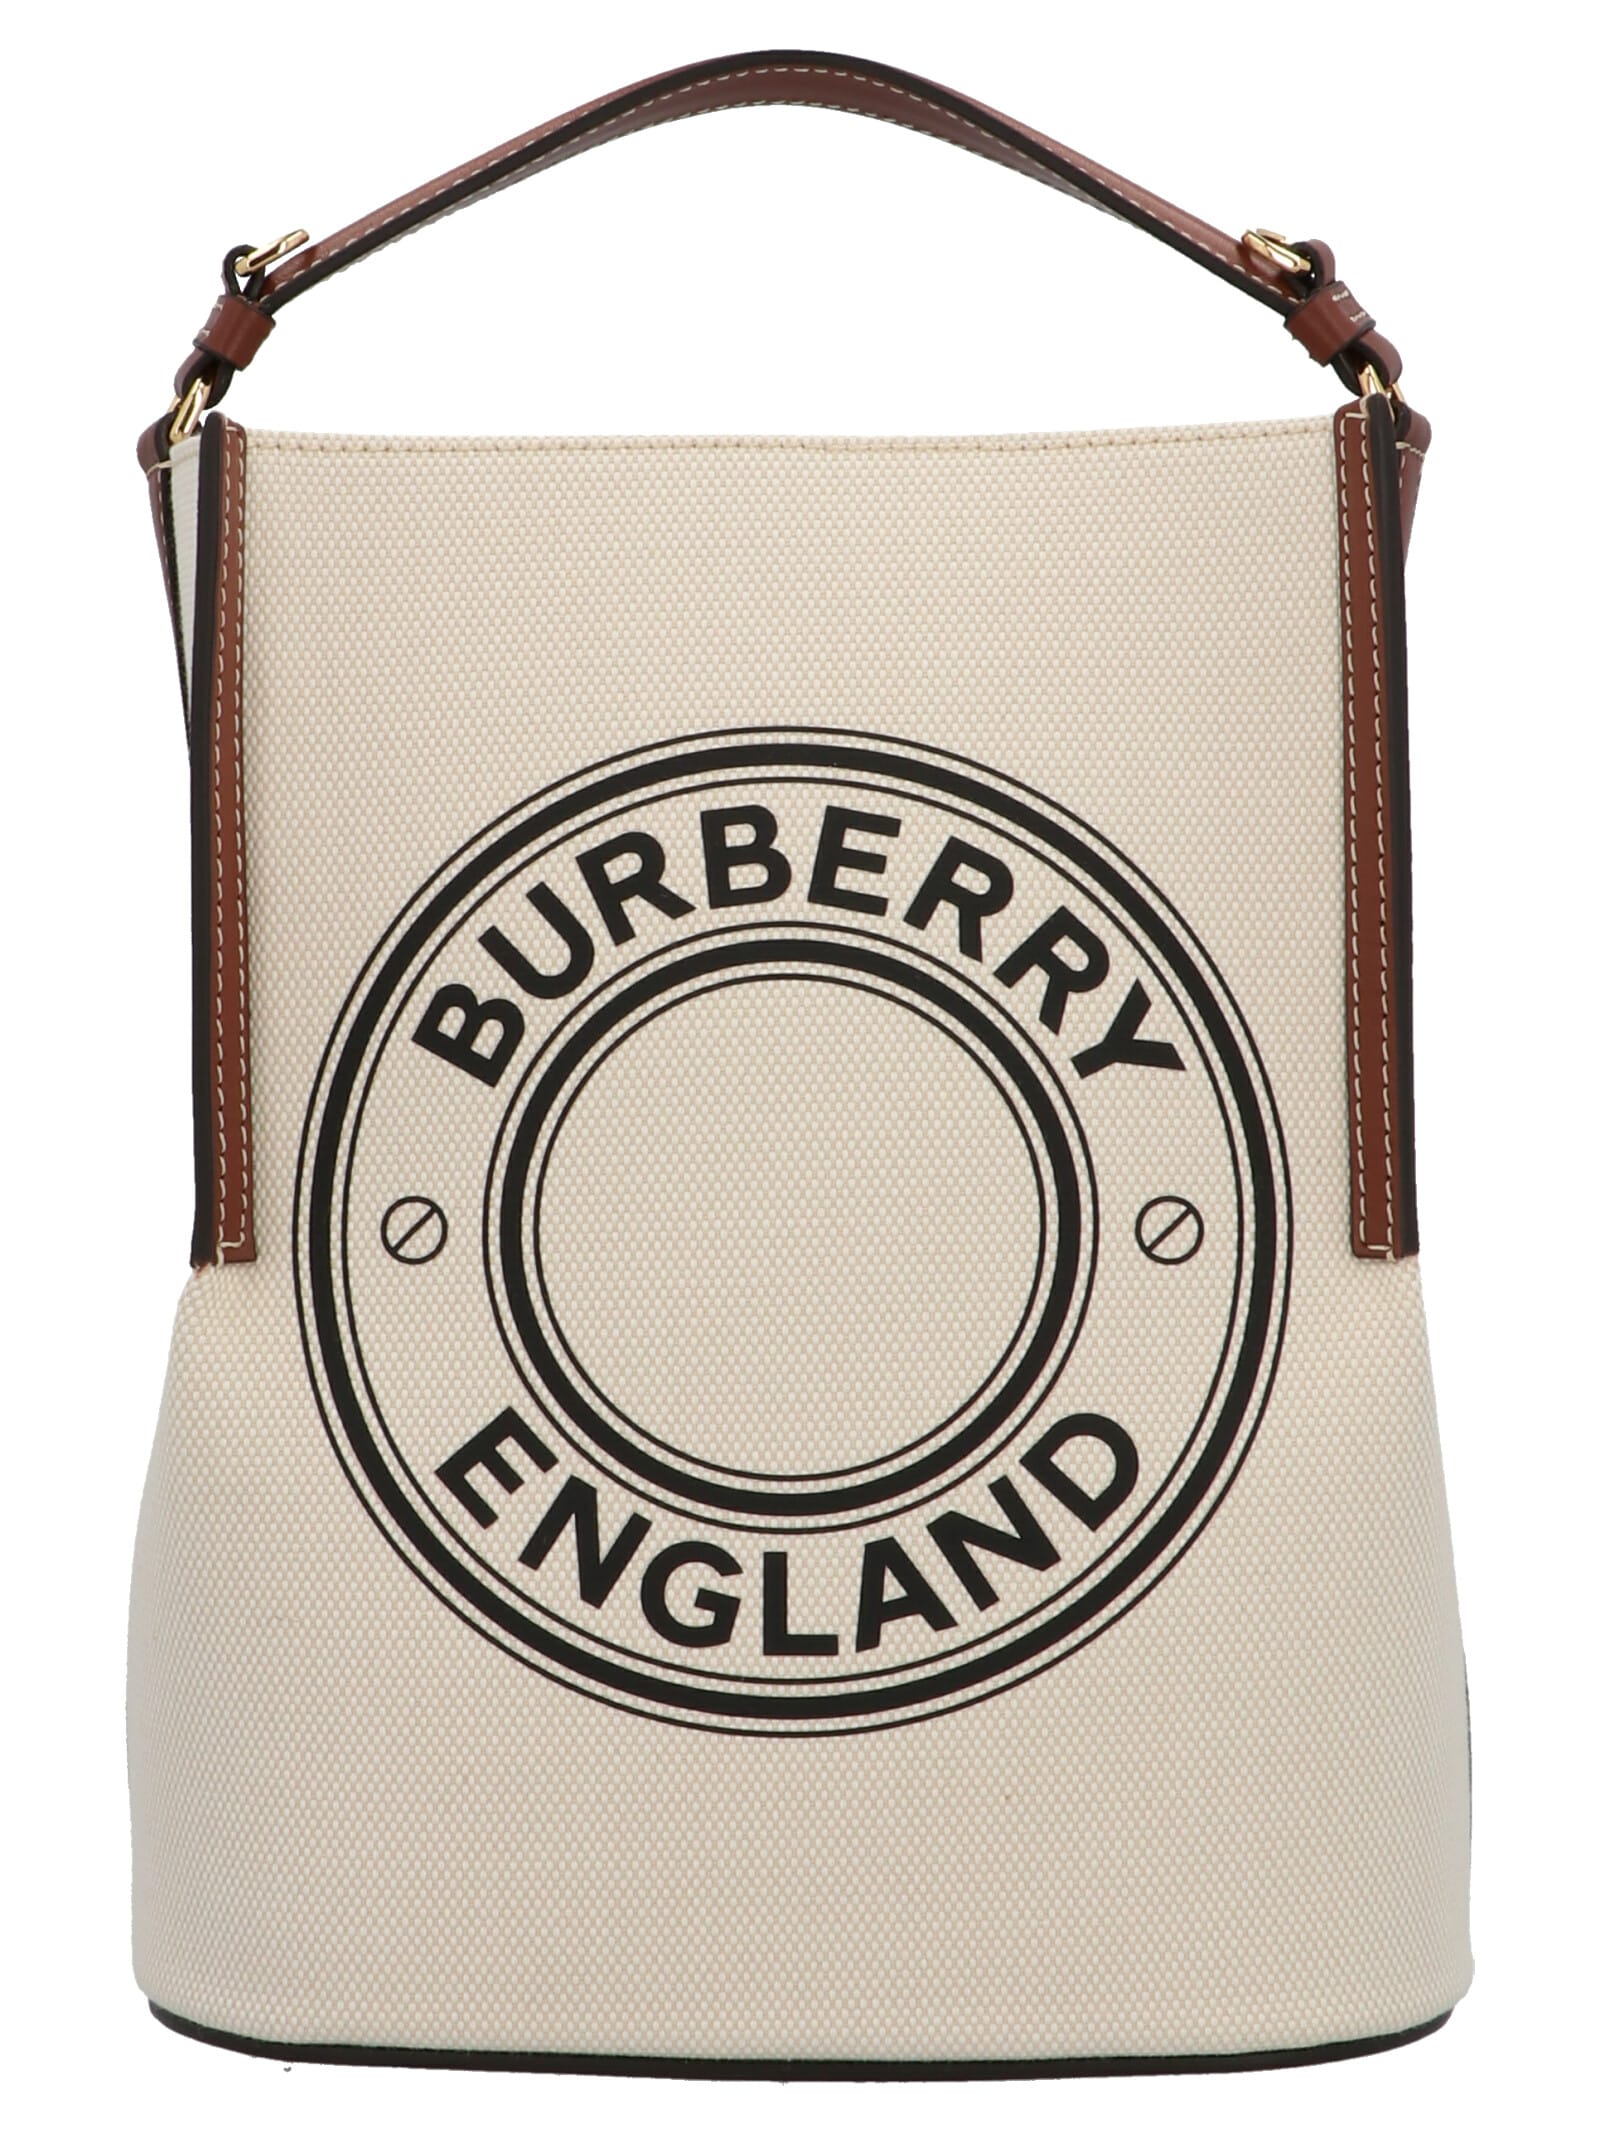 Burberry Pegg Small Bag In Beige